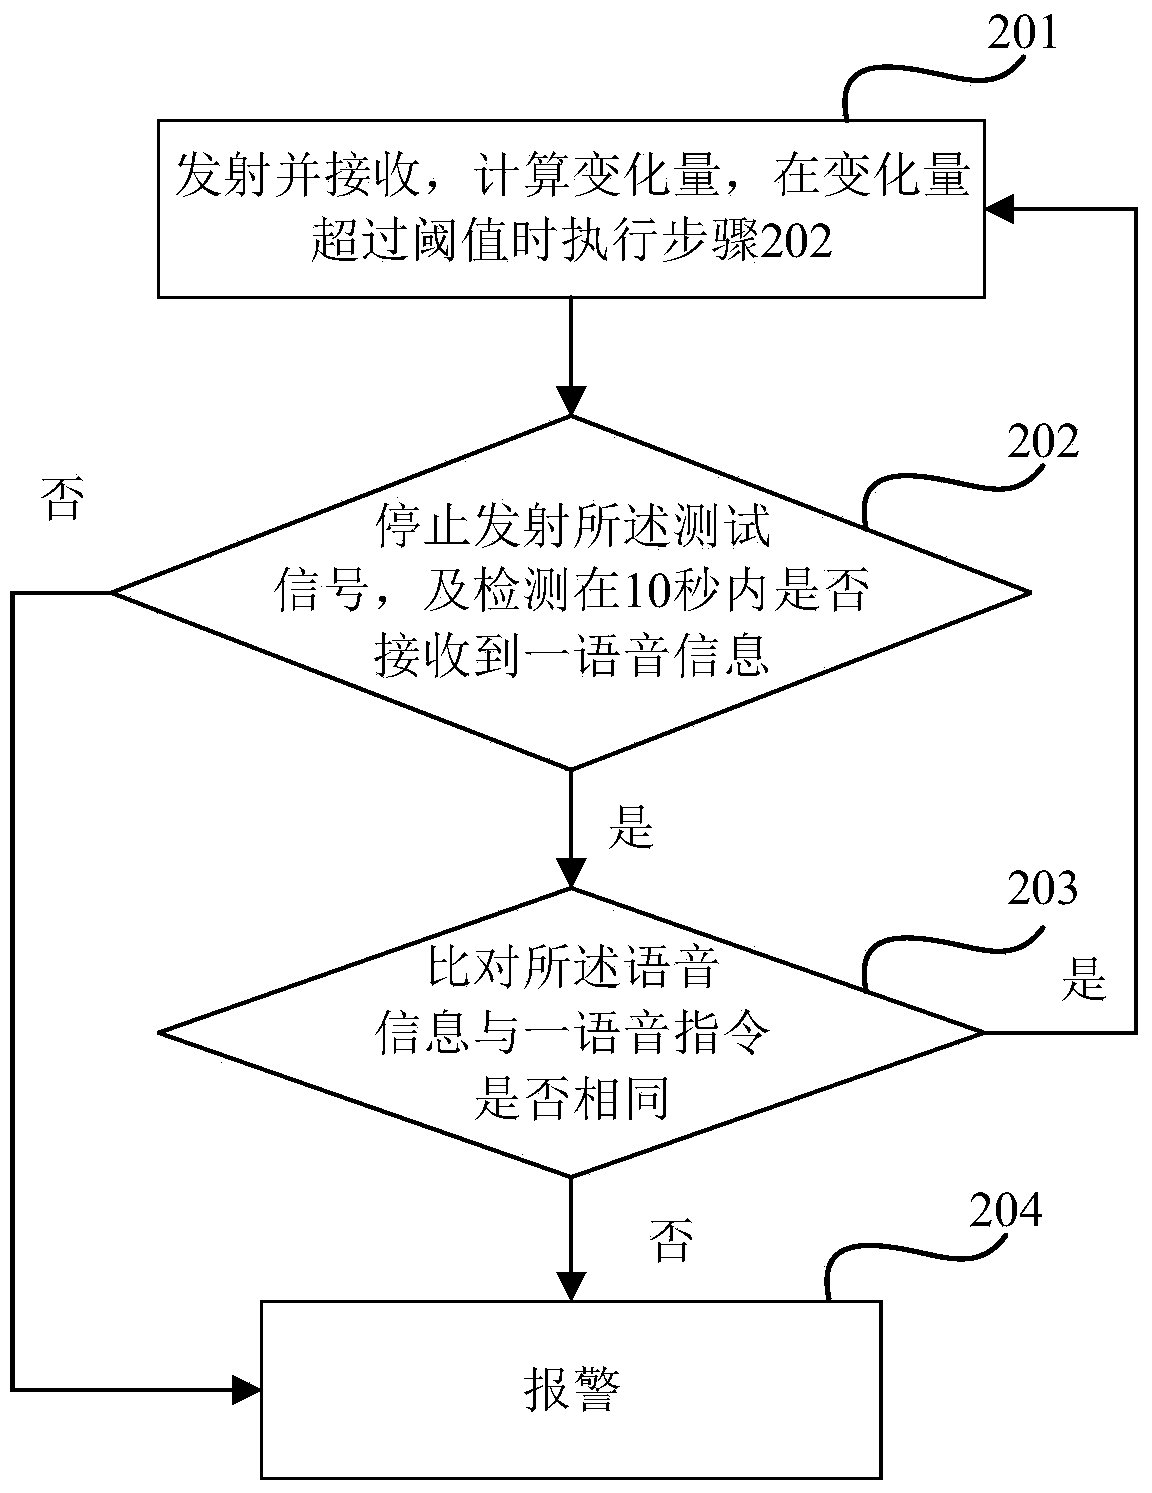 Anti-theft system and method